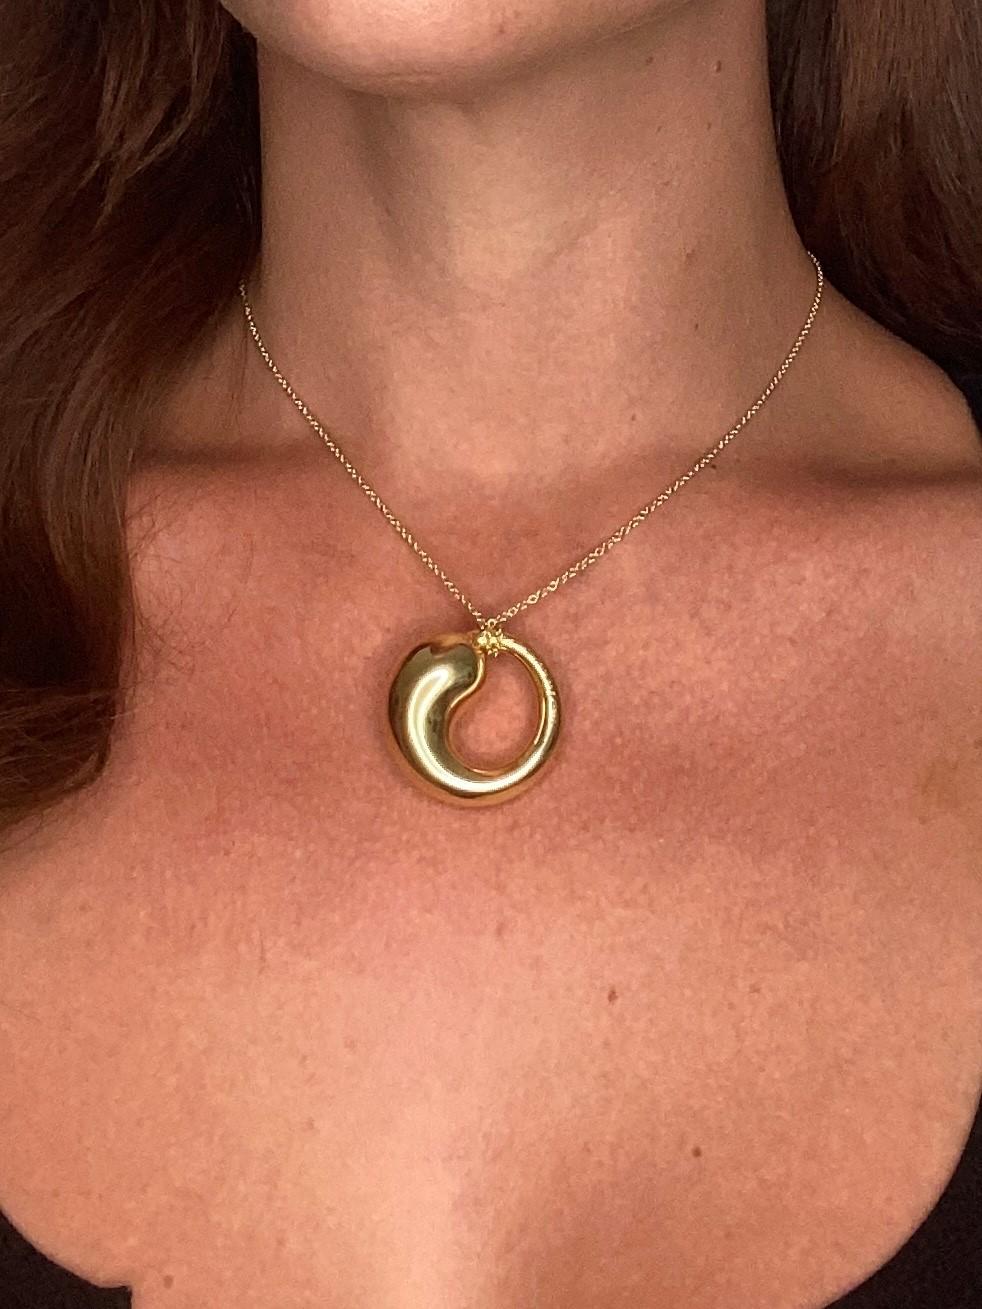 Tiffany & Co. 1977 Elsa Peretti Big Eternal Circle Necklace in 18Kt Yellow Gold 1